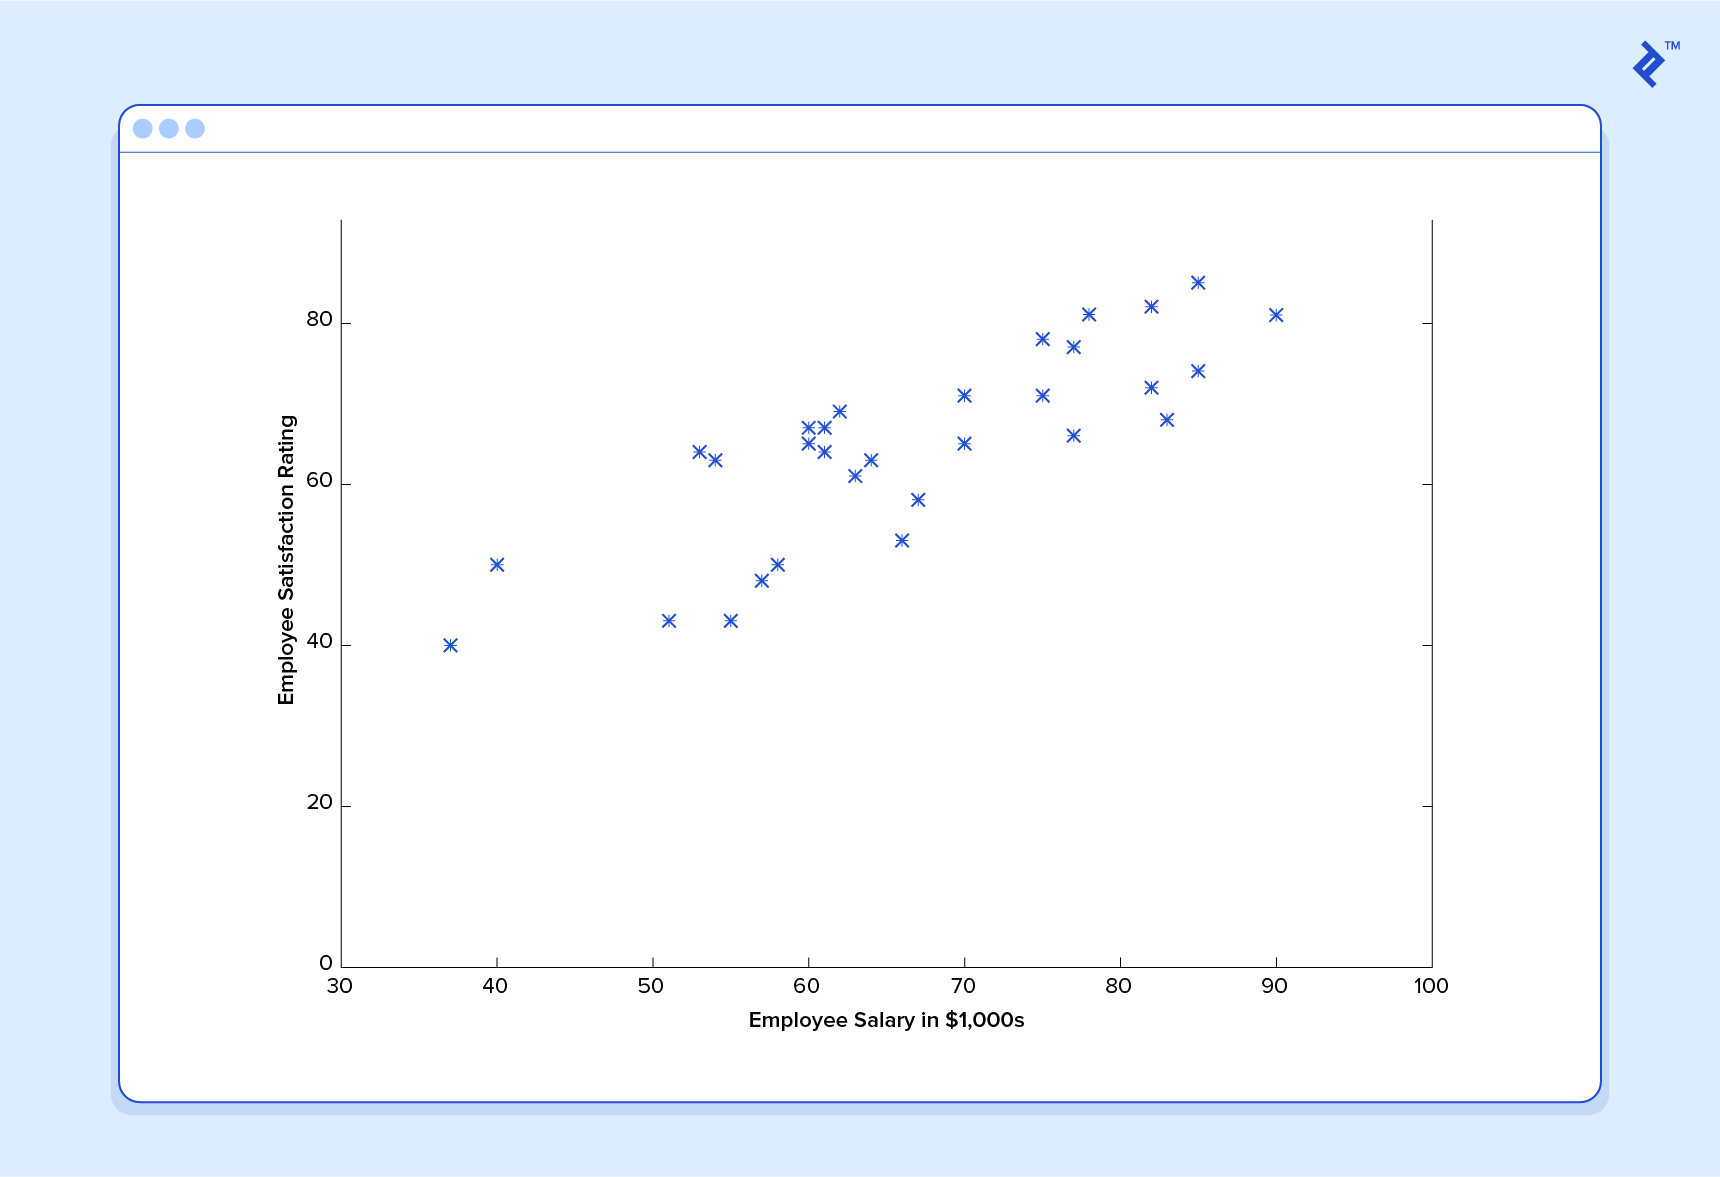 Employee satisfaction rating by salary is a great machine learning example.